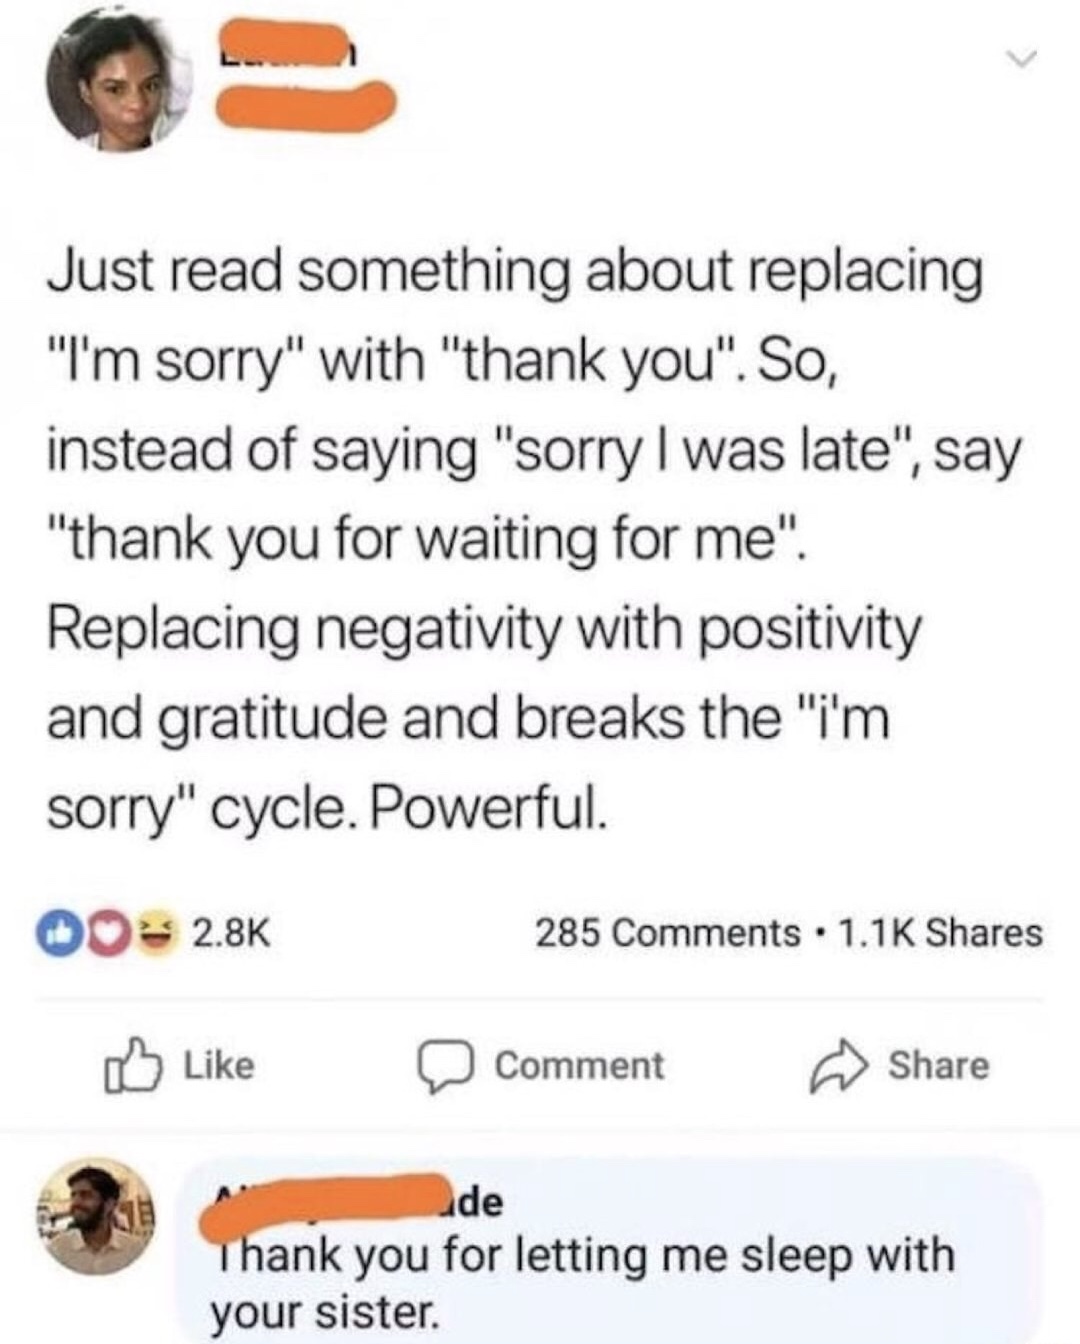 memes - thank you instead of sorry meme - Just read something about replacing "I'm sorry" with "thank you". So, instead of saying "sorry I was late", say "thank you for waiting for me". Replacing negativity with positivity and gratitude and breaks the "i'